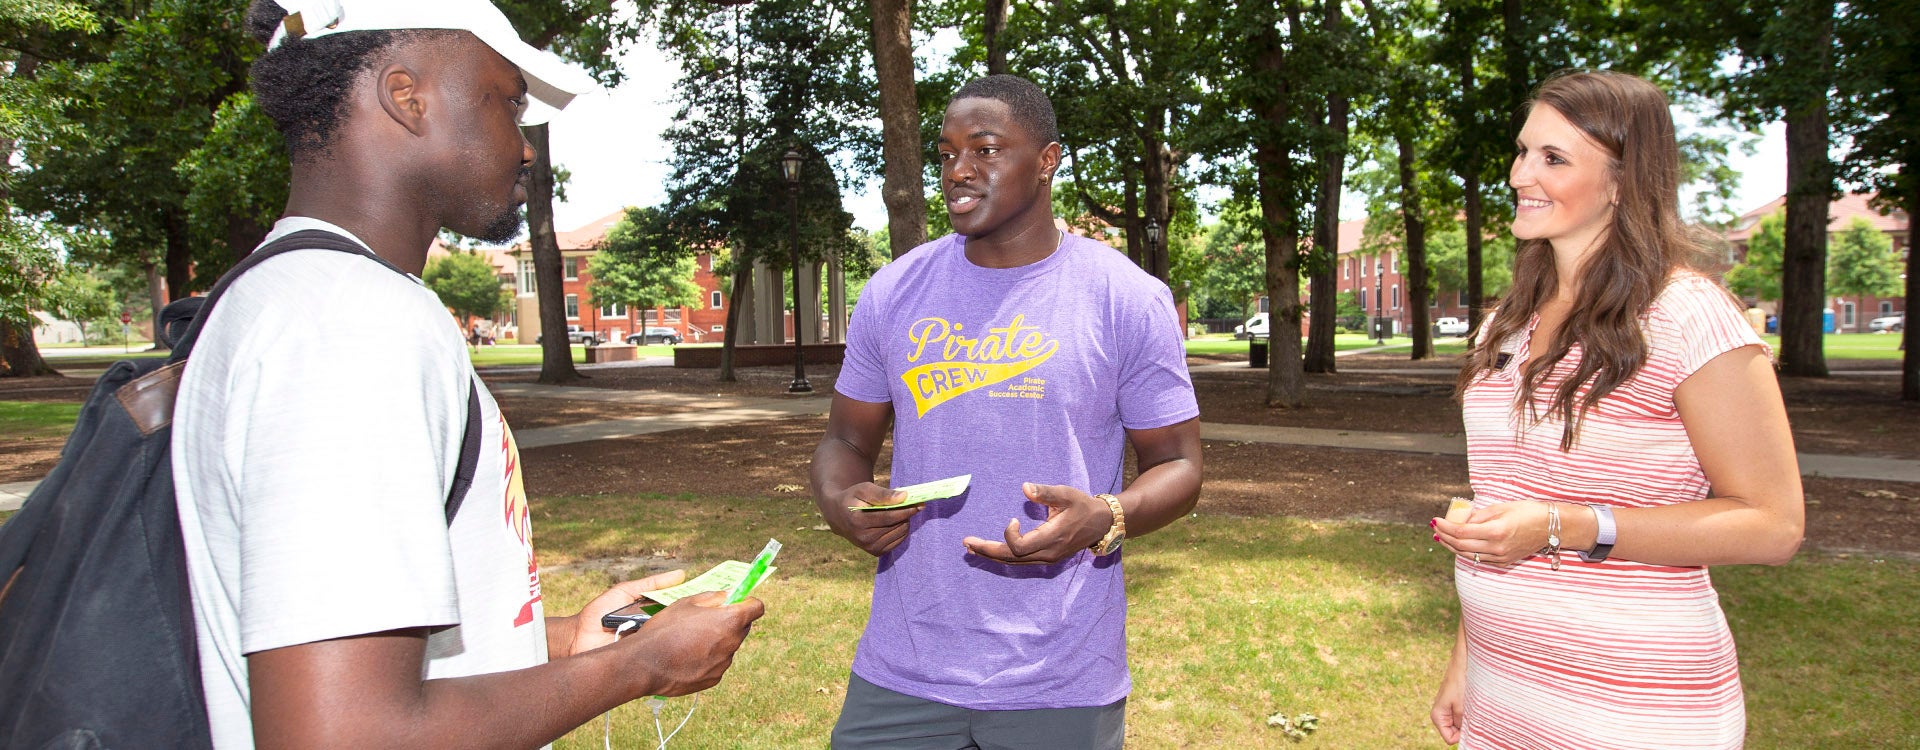 Davarion David, center, and Brittany Hoyt, assistant director at the Pirate Academic Success Center, talk to a summer school student about what the center has to offer while passing out popsicles on the mall Thursday. (Photos by Rhett Butler)